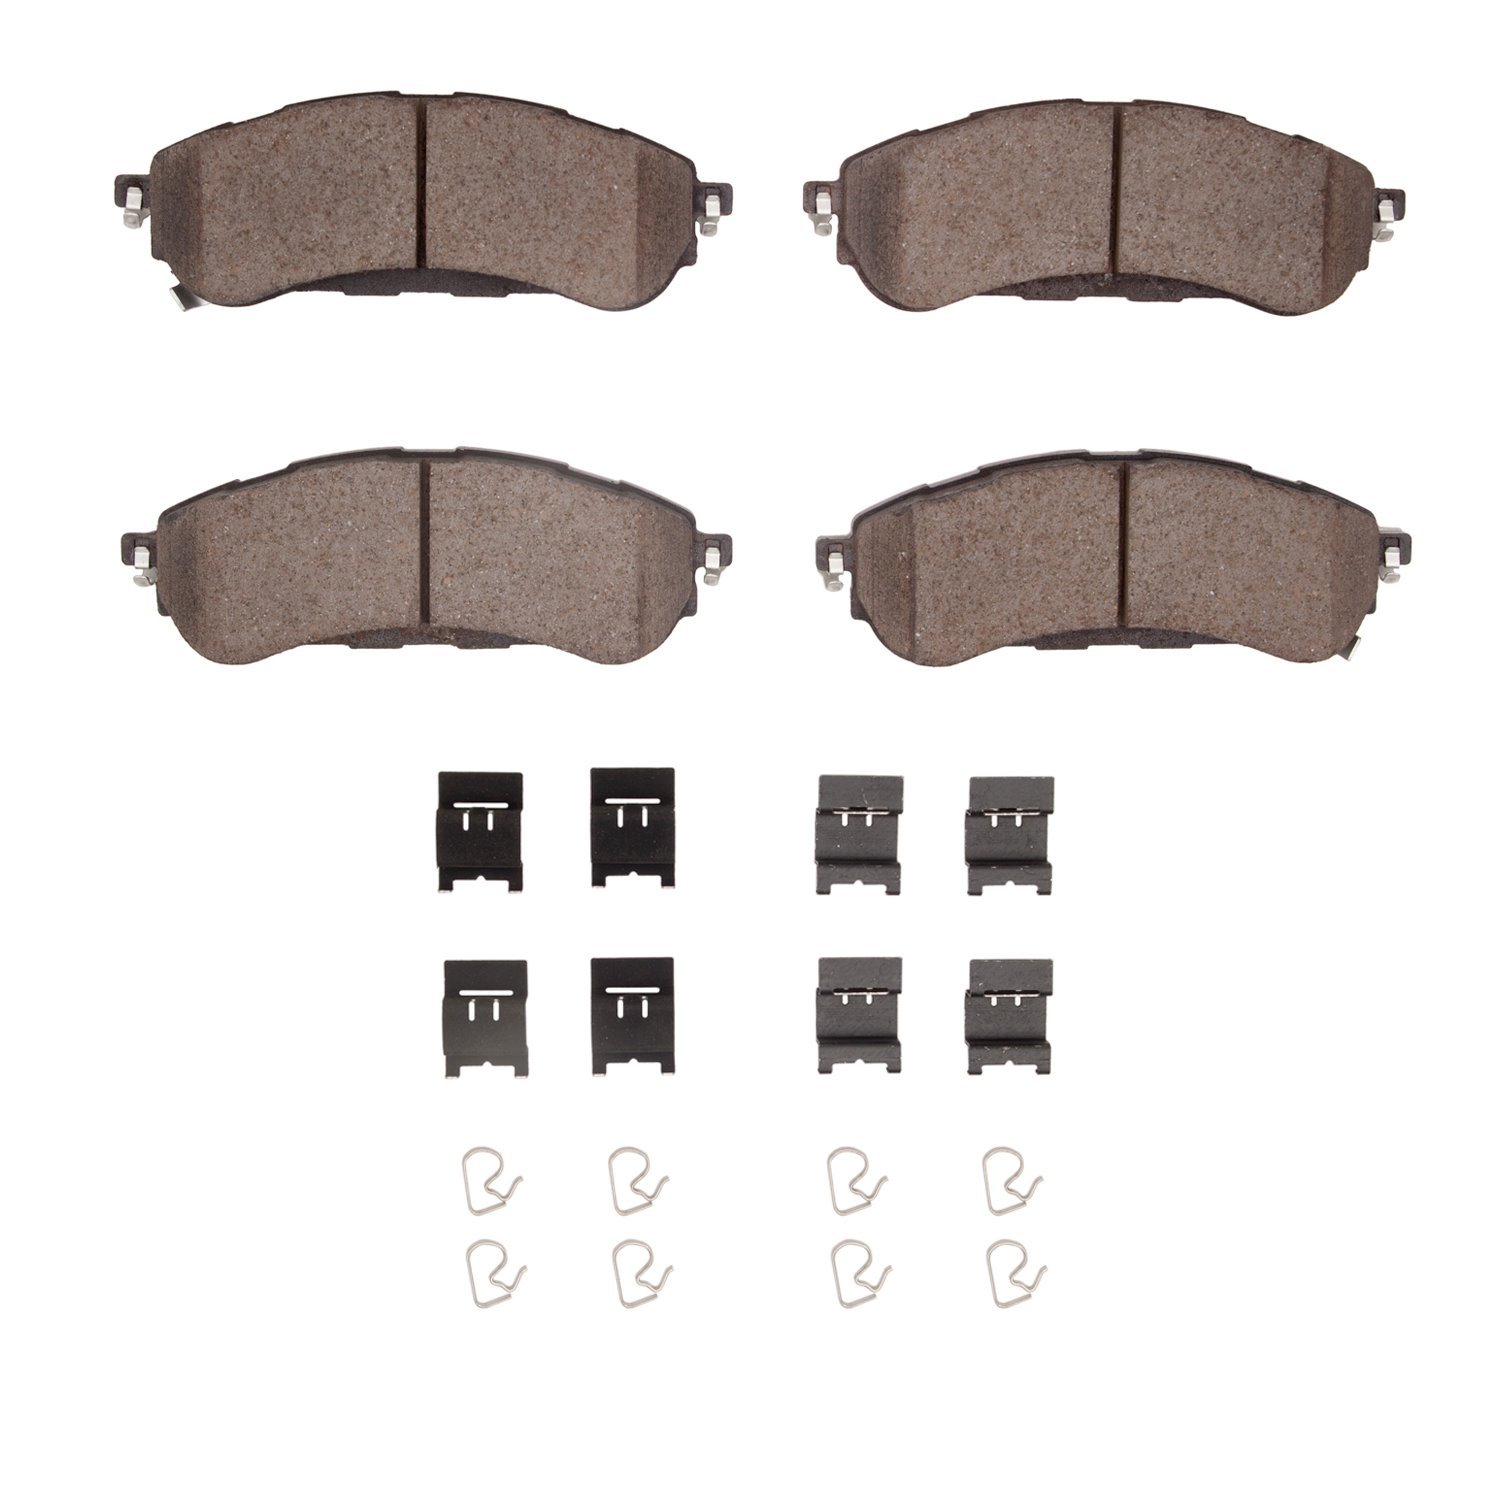 1400-2208-01 Ultimate-Duty Brake Pads & Hardware Kit, Fits Select Ford/Lincoln/Mercury/Mazda, Position: Rear